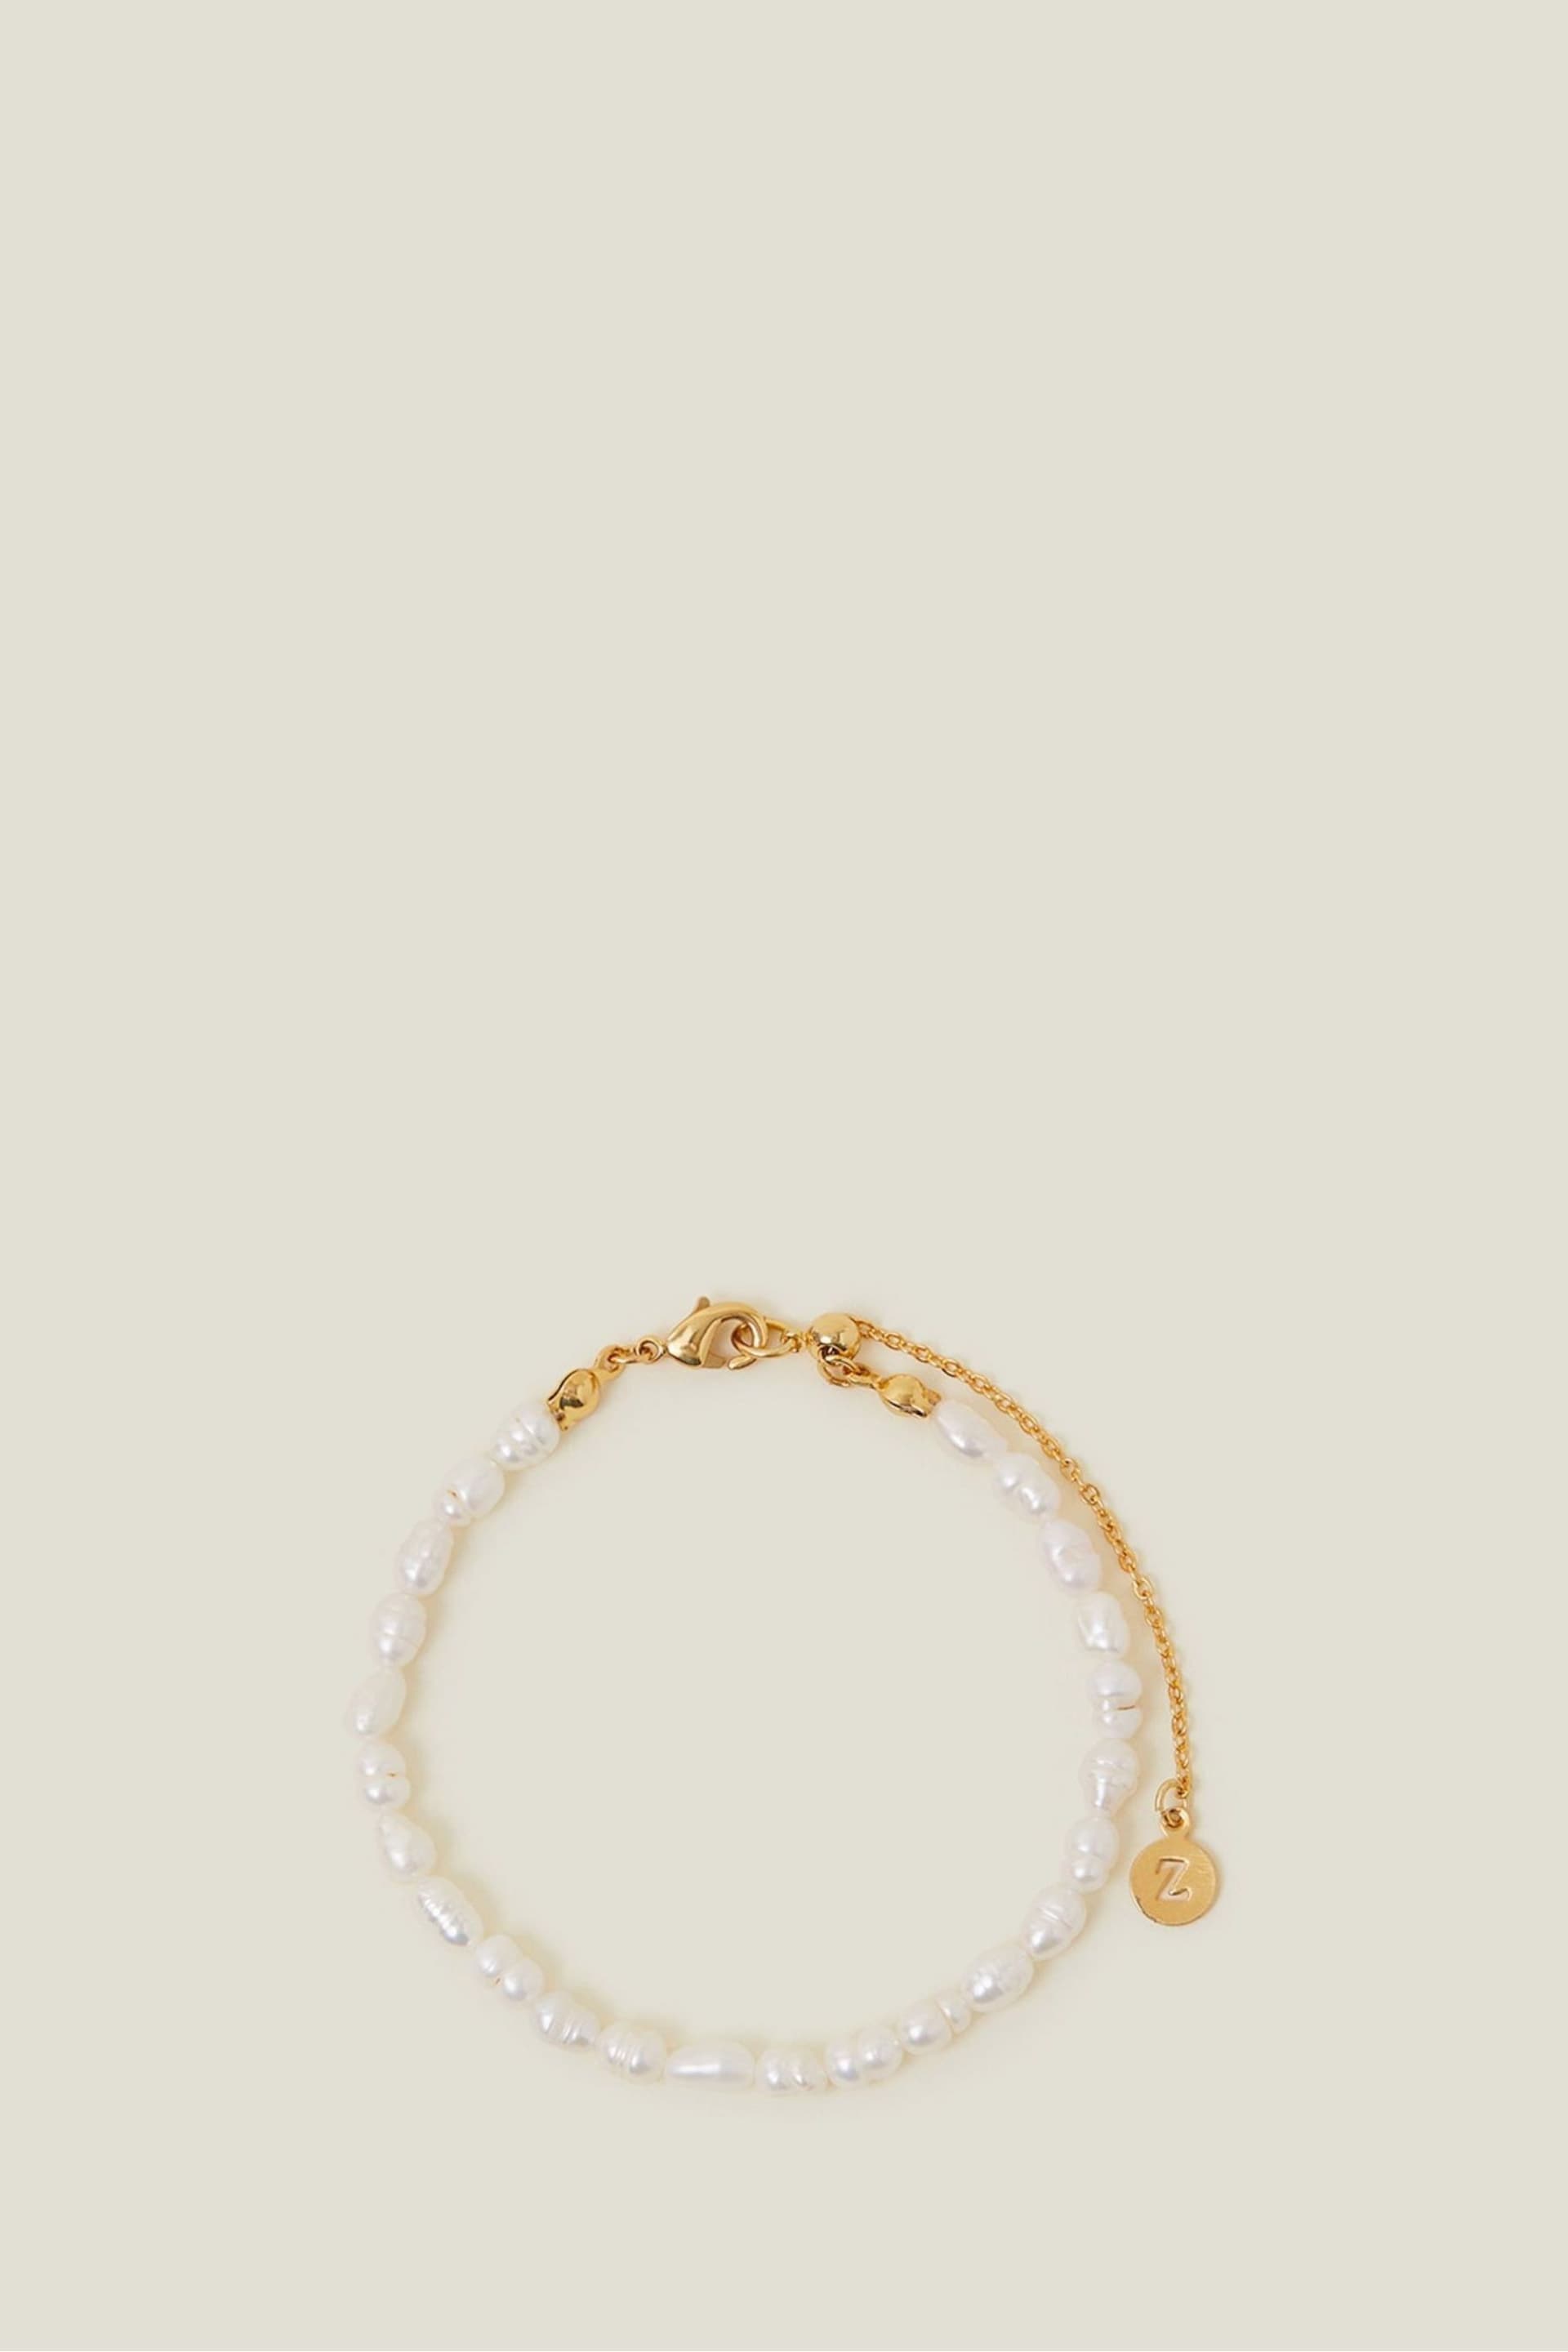 Accessorize 14ct Gold Plated Seed Pearl Bracelet - Image 1 of 3